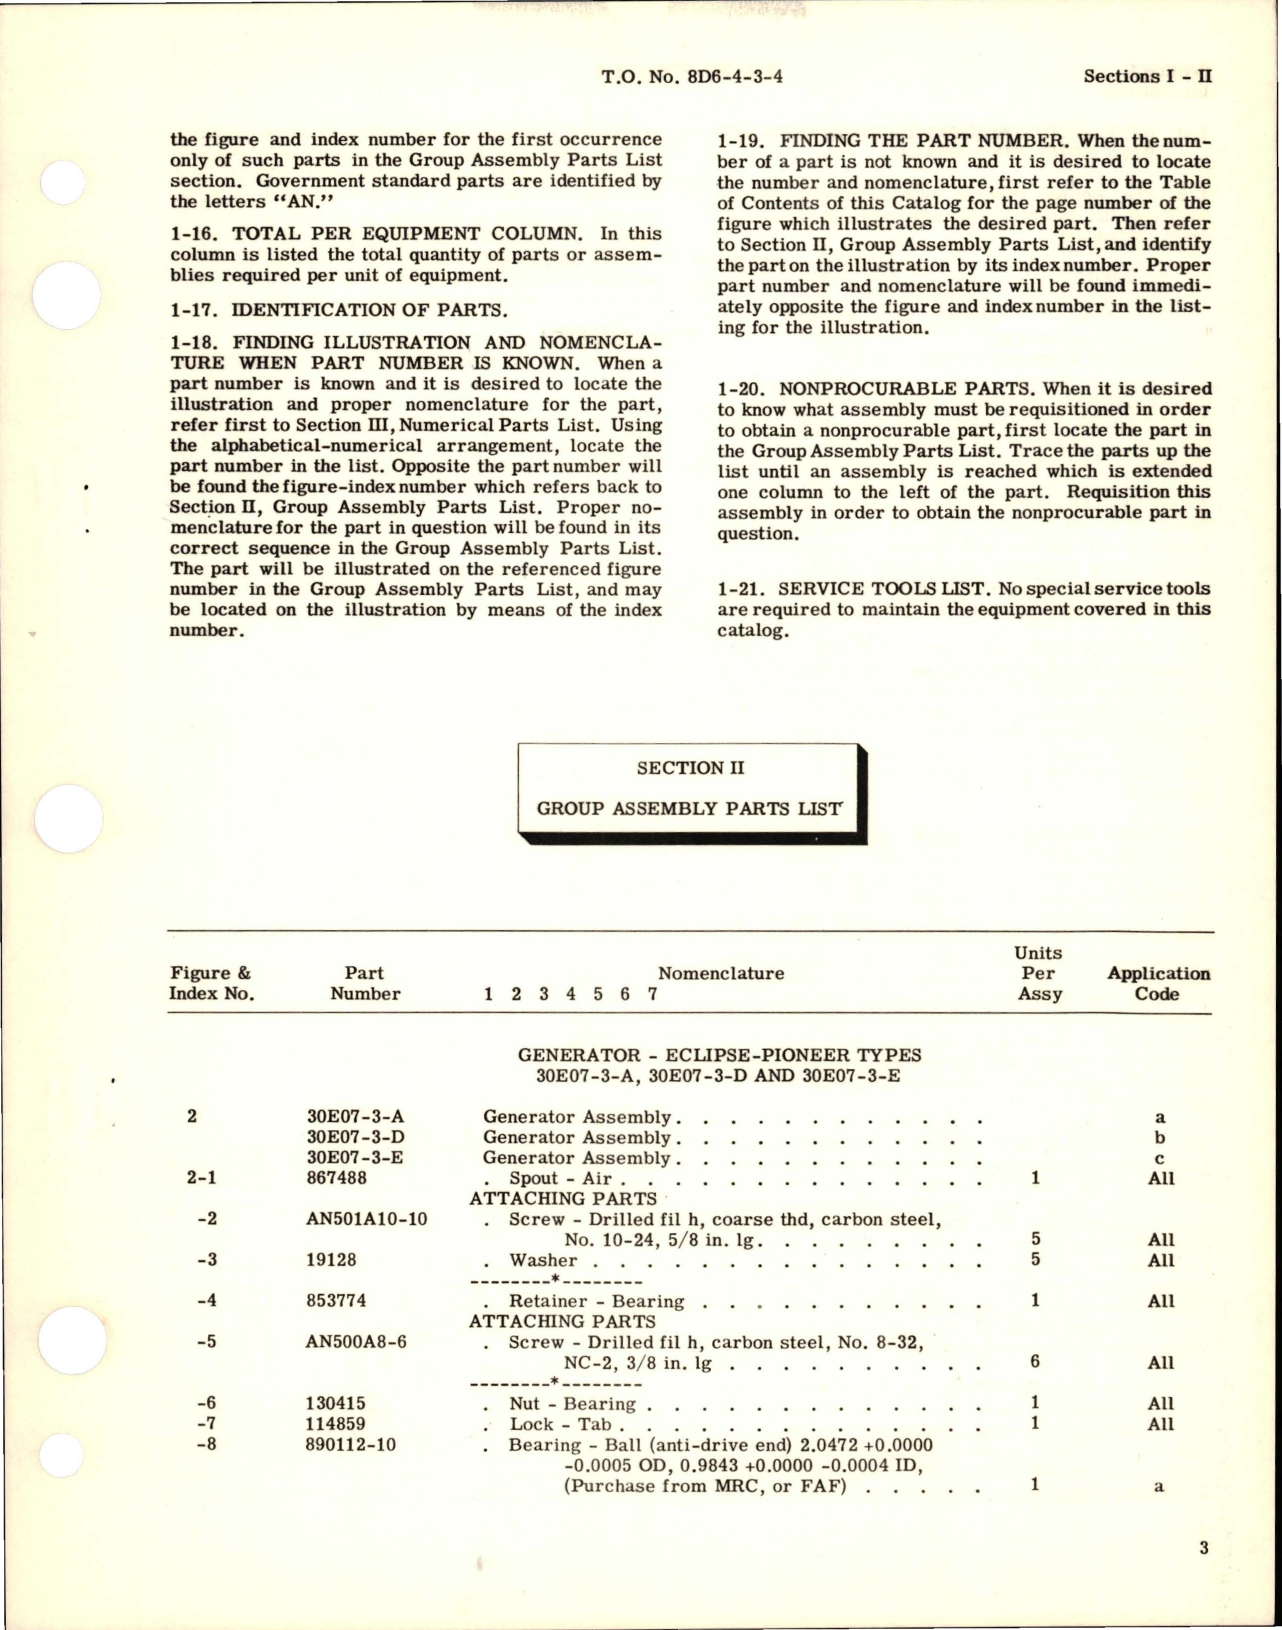 Sample page 5 from AirCorps Library document: Parts Catalog for Generators - Types 30E07-3-A, 30E07-3-D and 30E07-3-E